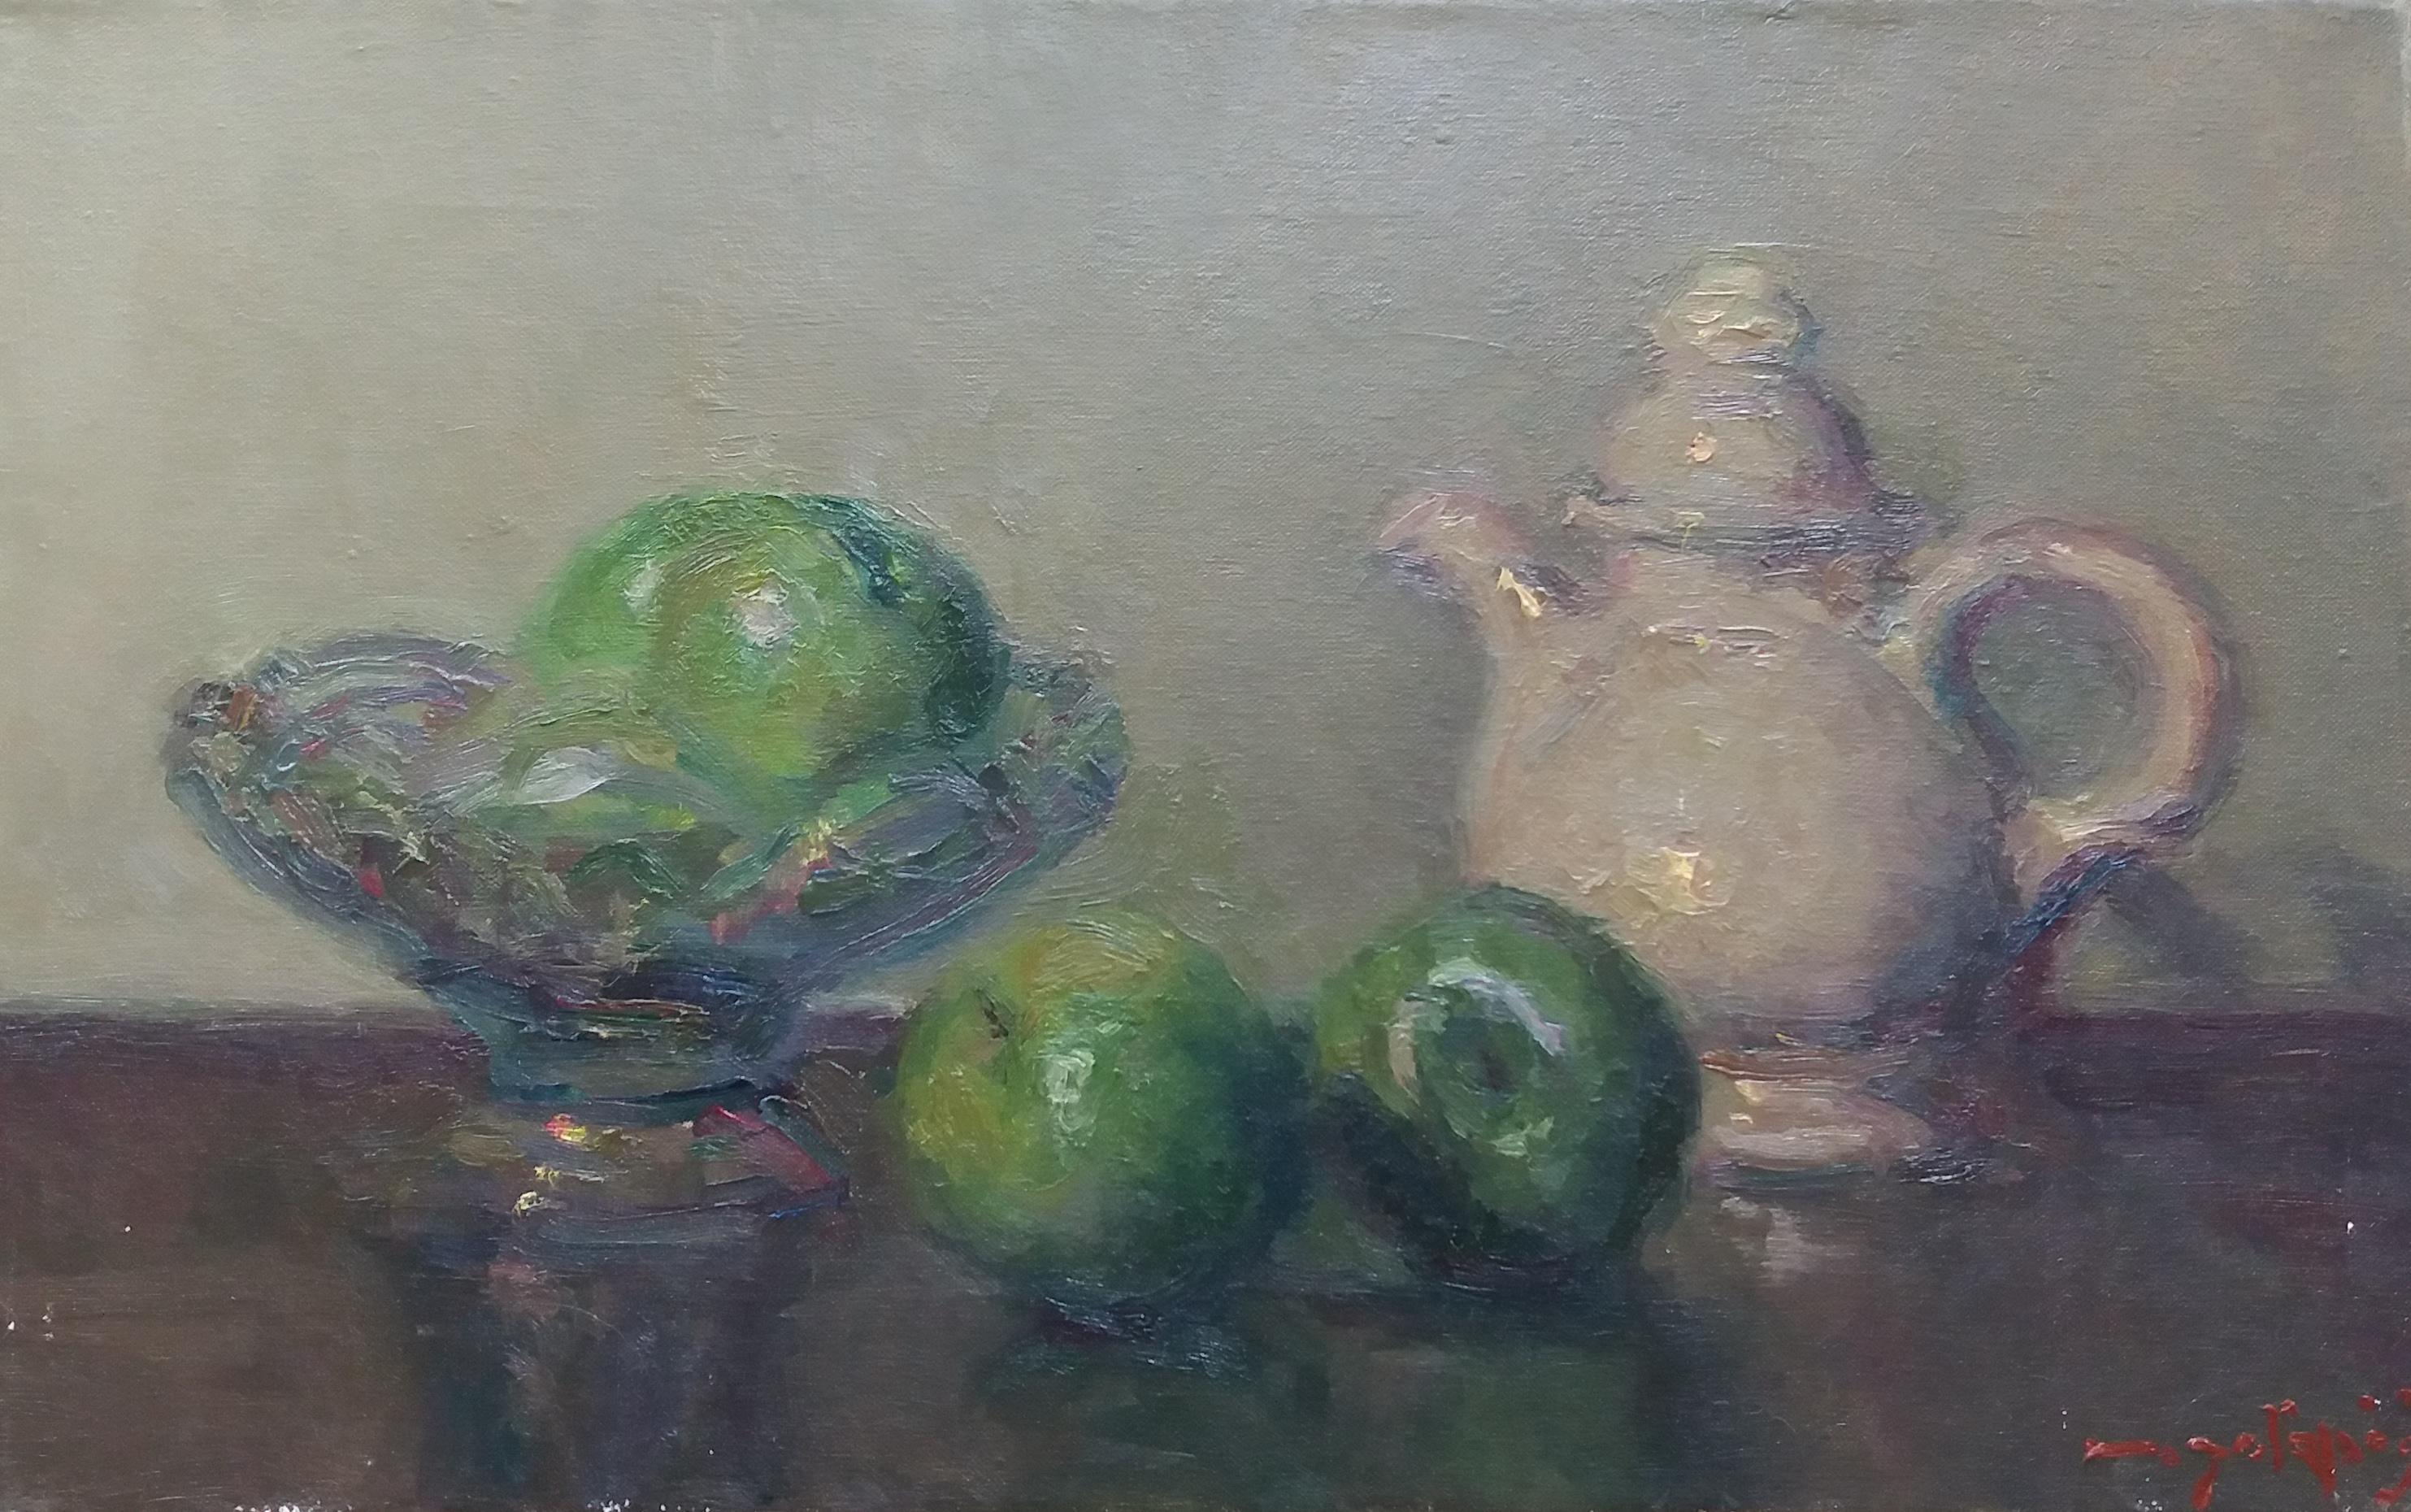  Sola Puig  GREEN APPLES original impressionist acrylic painting - Painting by Joan SOLA PUIG